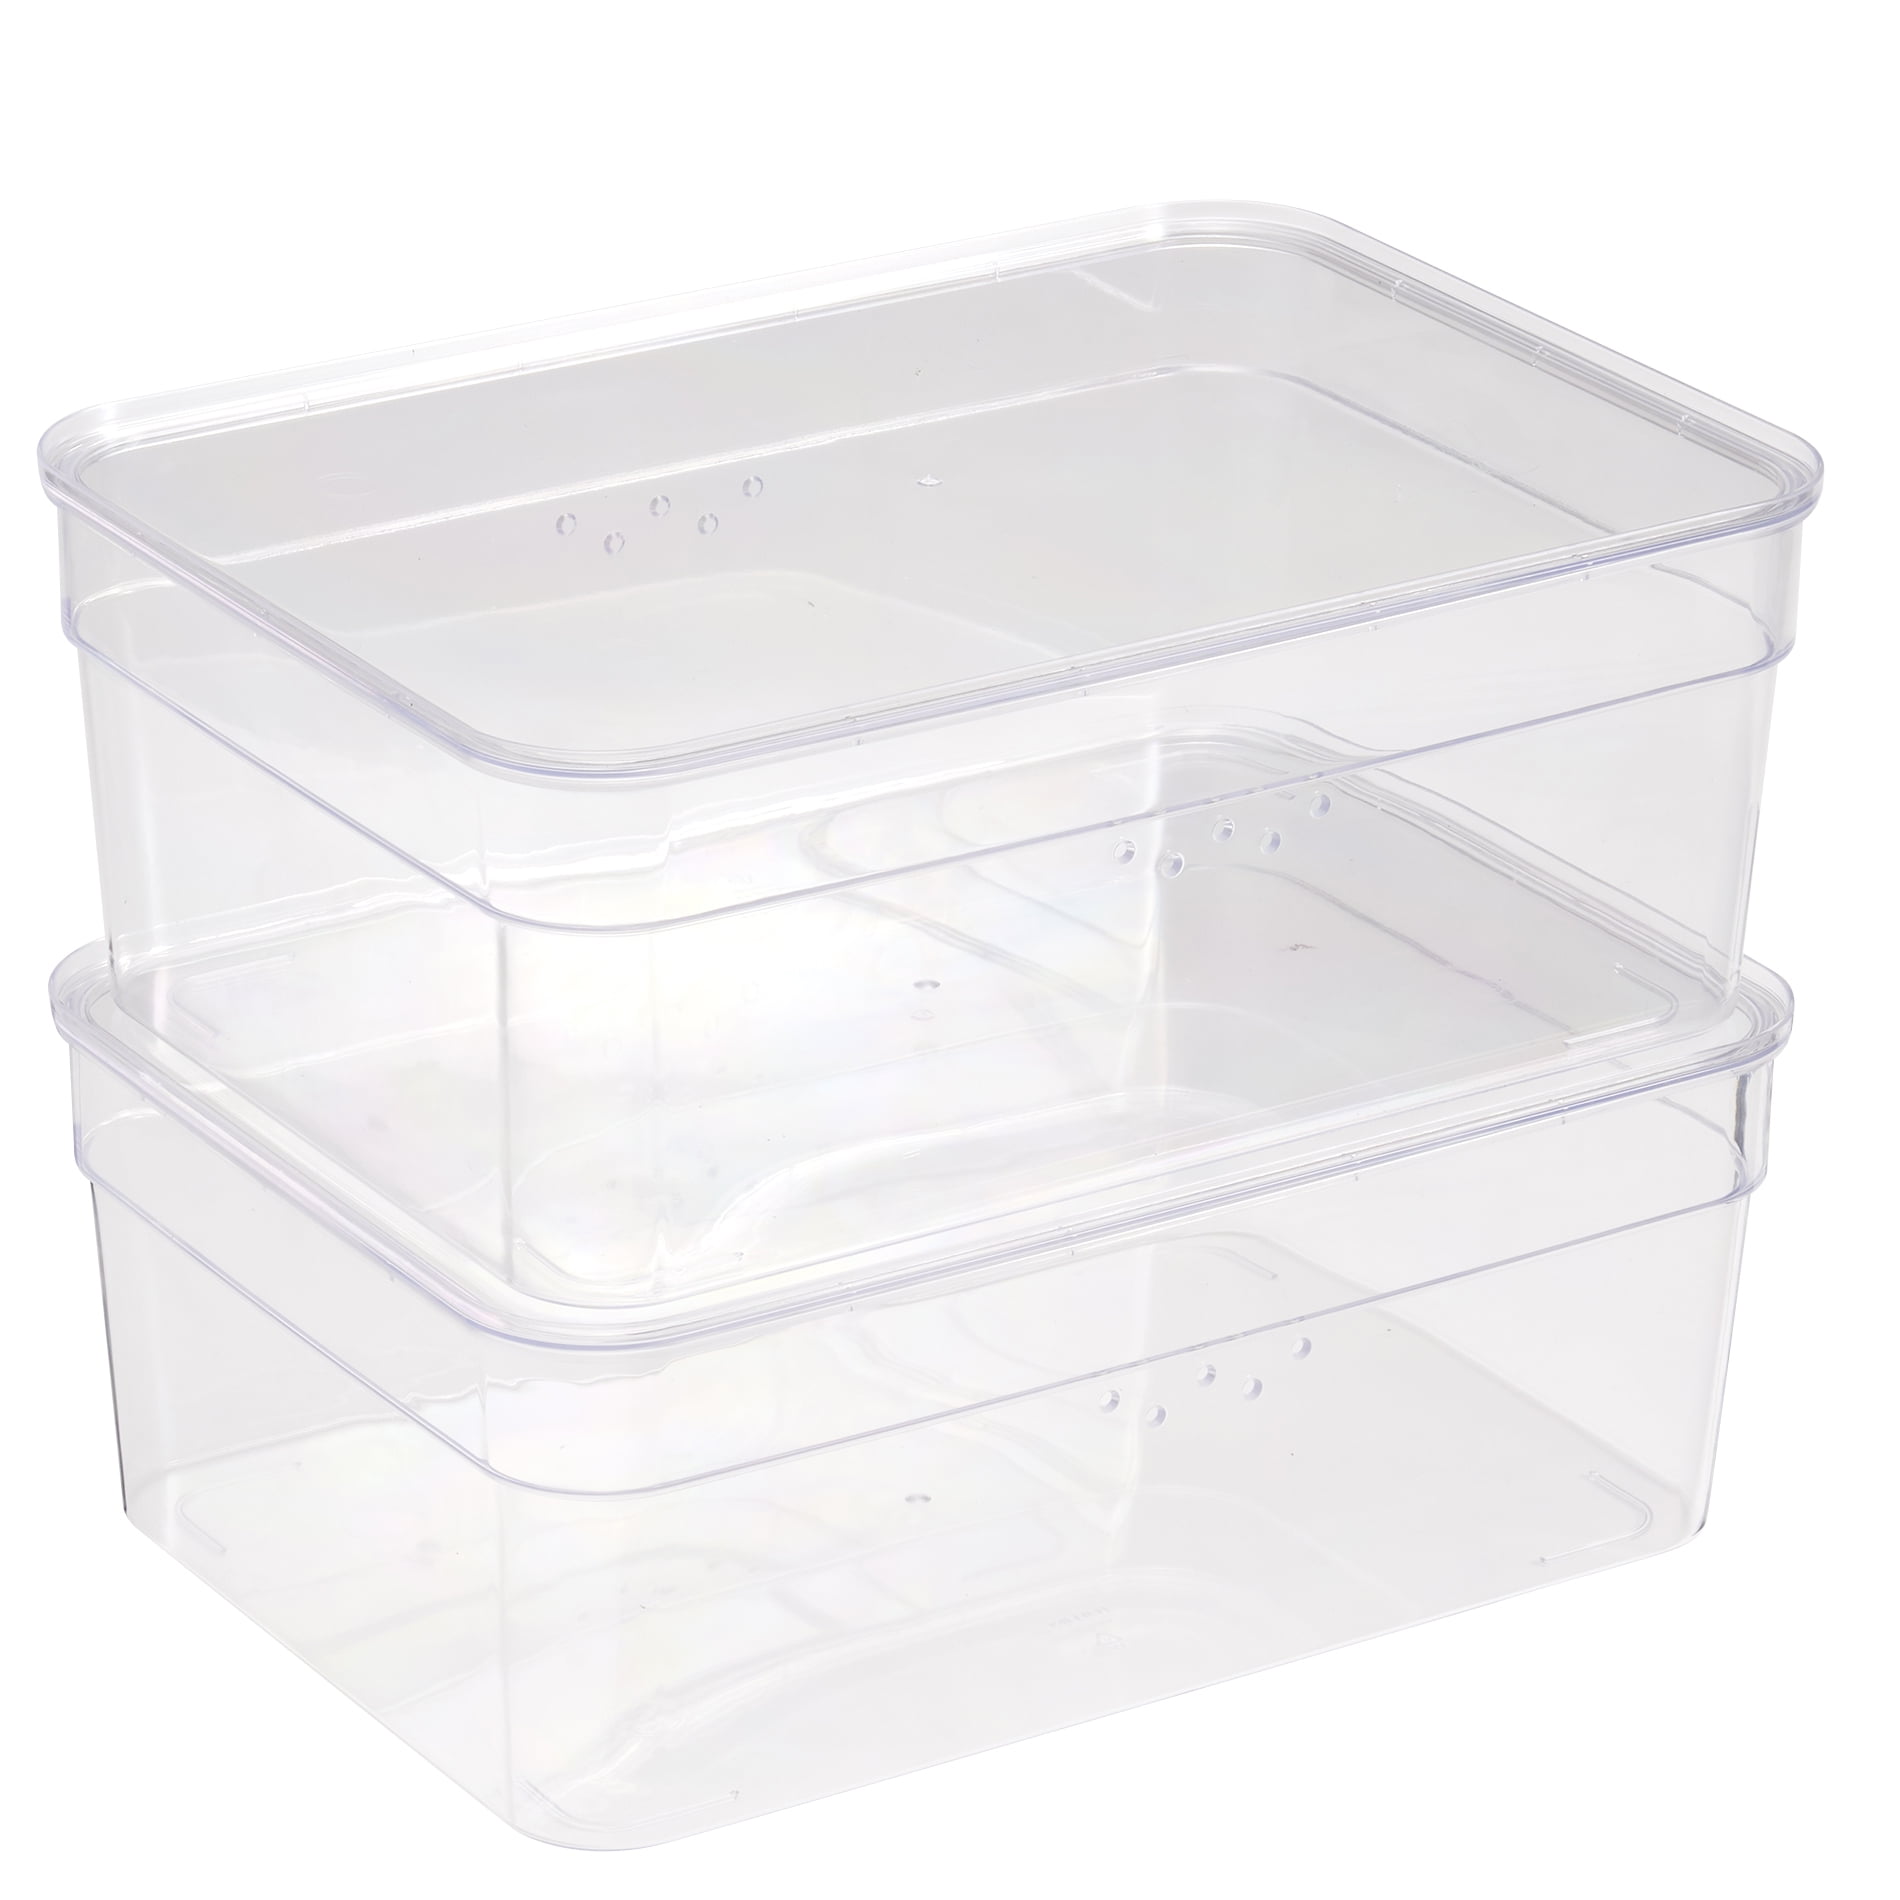  Household Products Clear Shoe Box 2 Pack, Sneaker